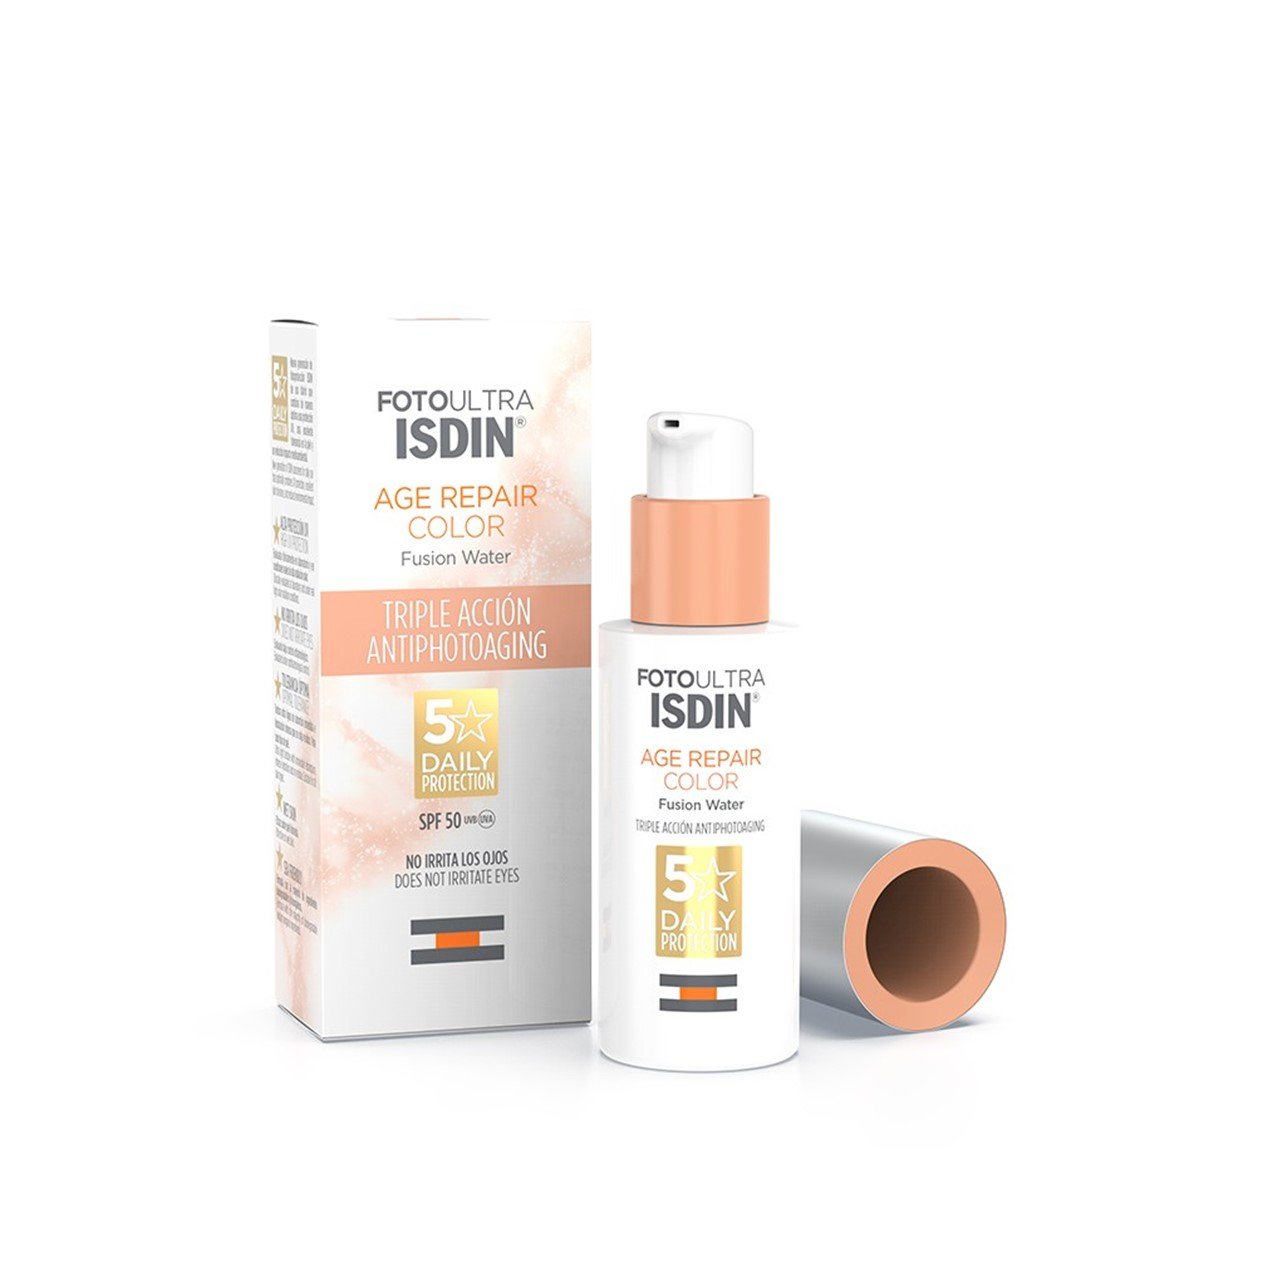 ISDIN FotoUltra Age Repair Color Fusion Water SPF50 50ml (1.69floz)